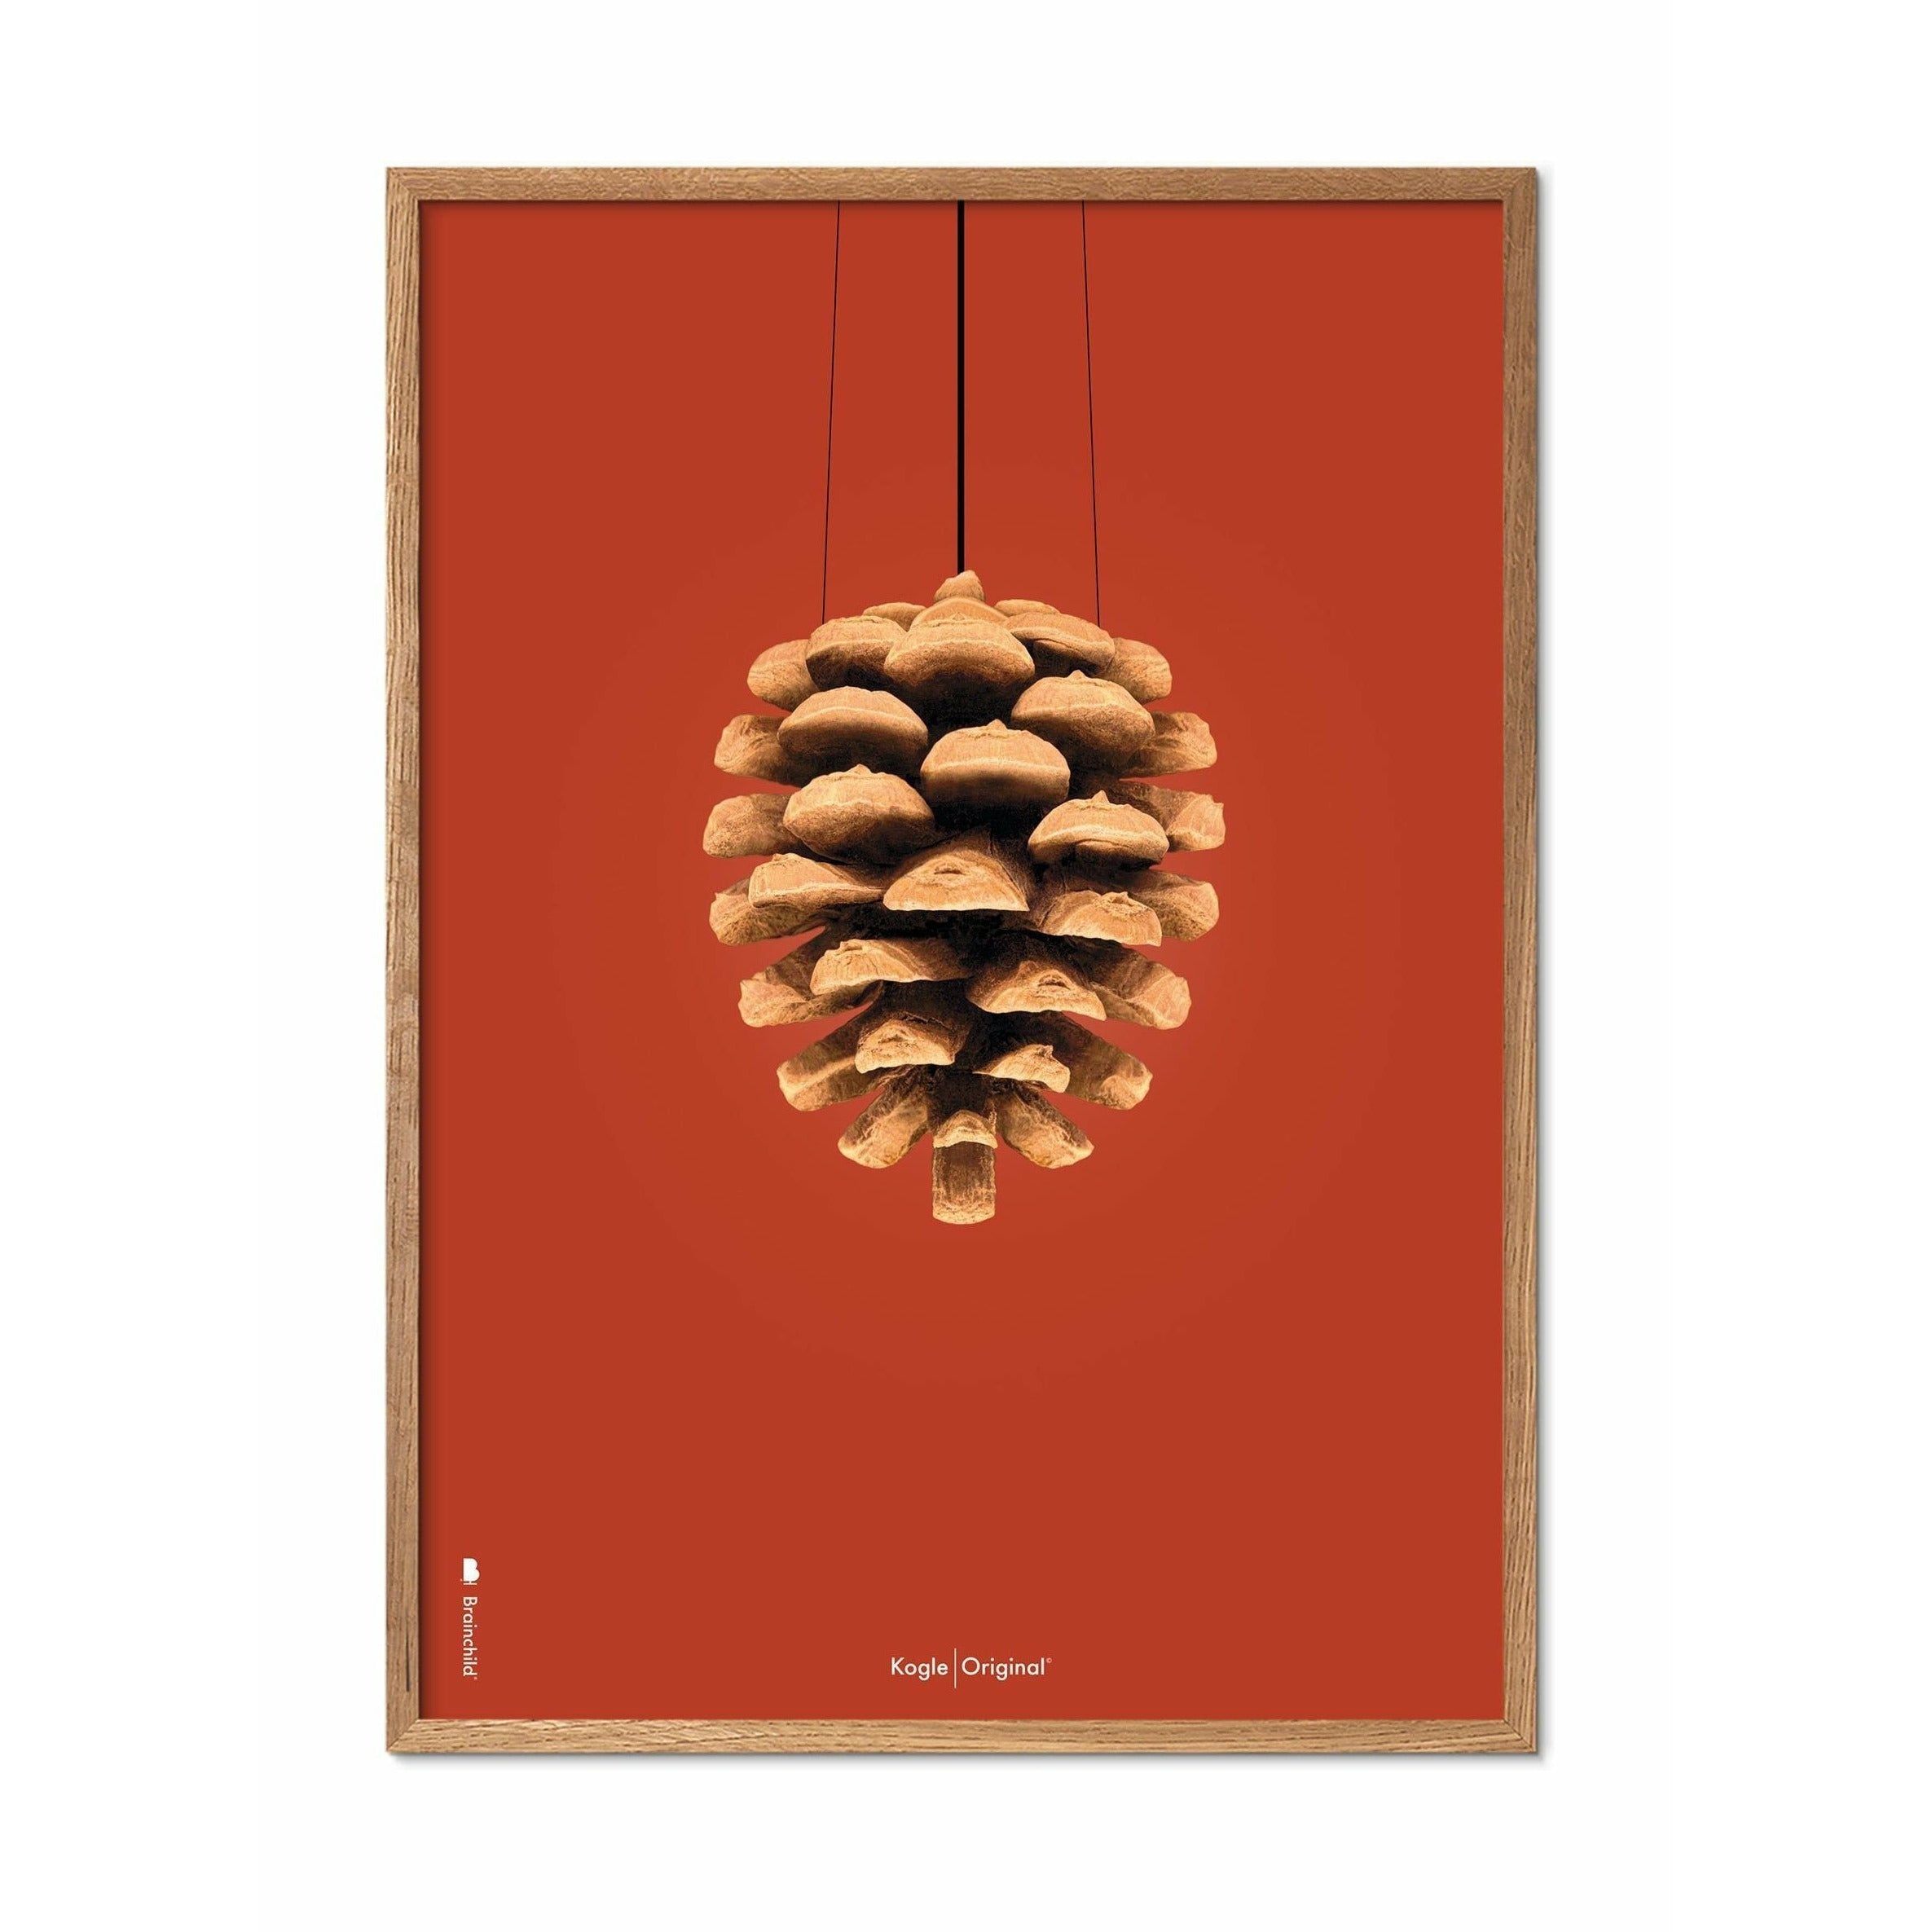 Brainchild Pine Cone Classic Poster, Frame Made Of Light Wood 30x40 Cm, Red Background